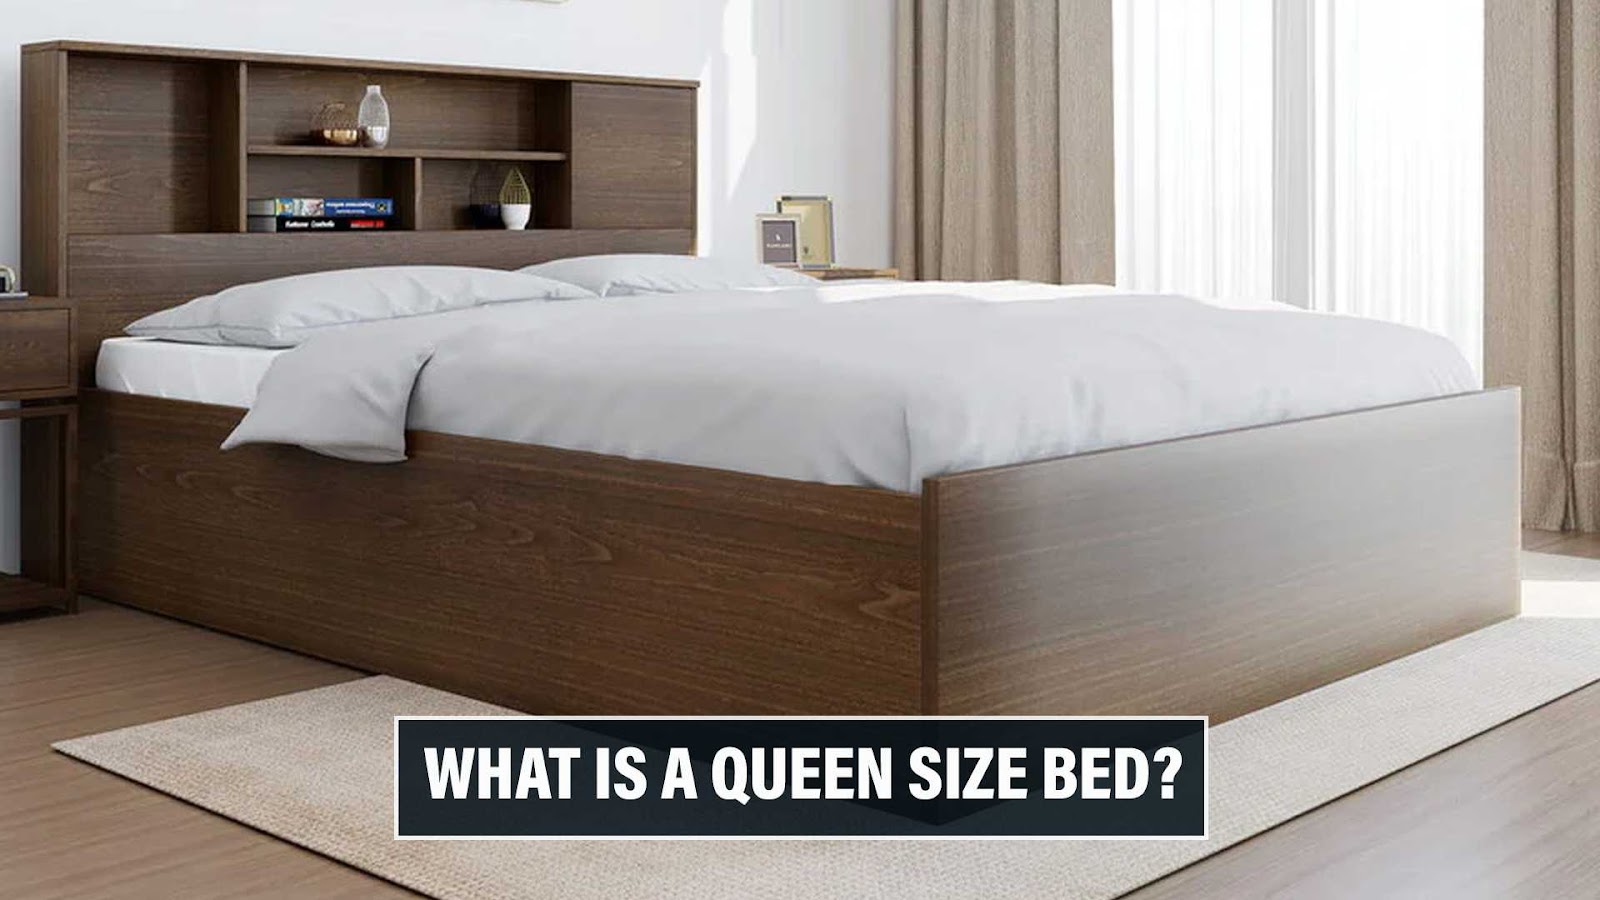 What is a Queen Size Bed?